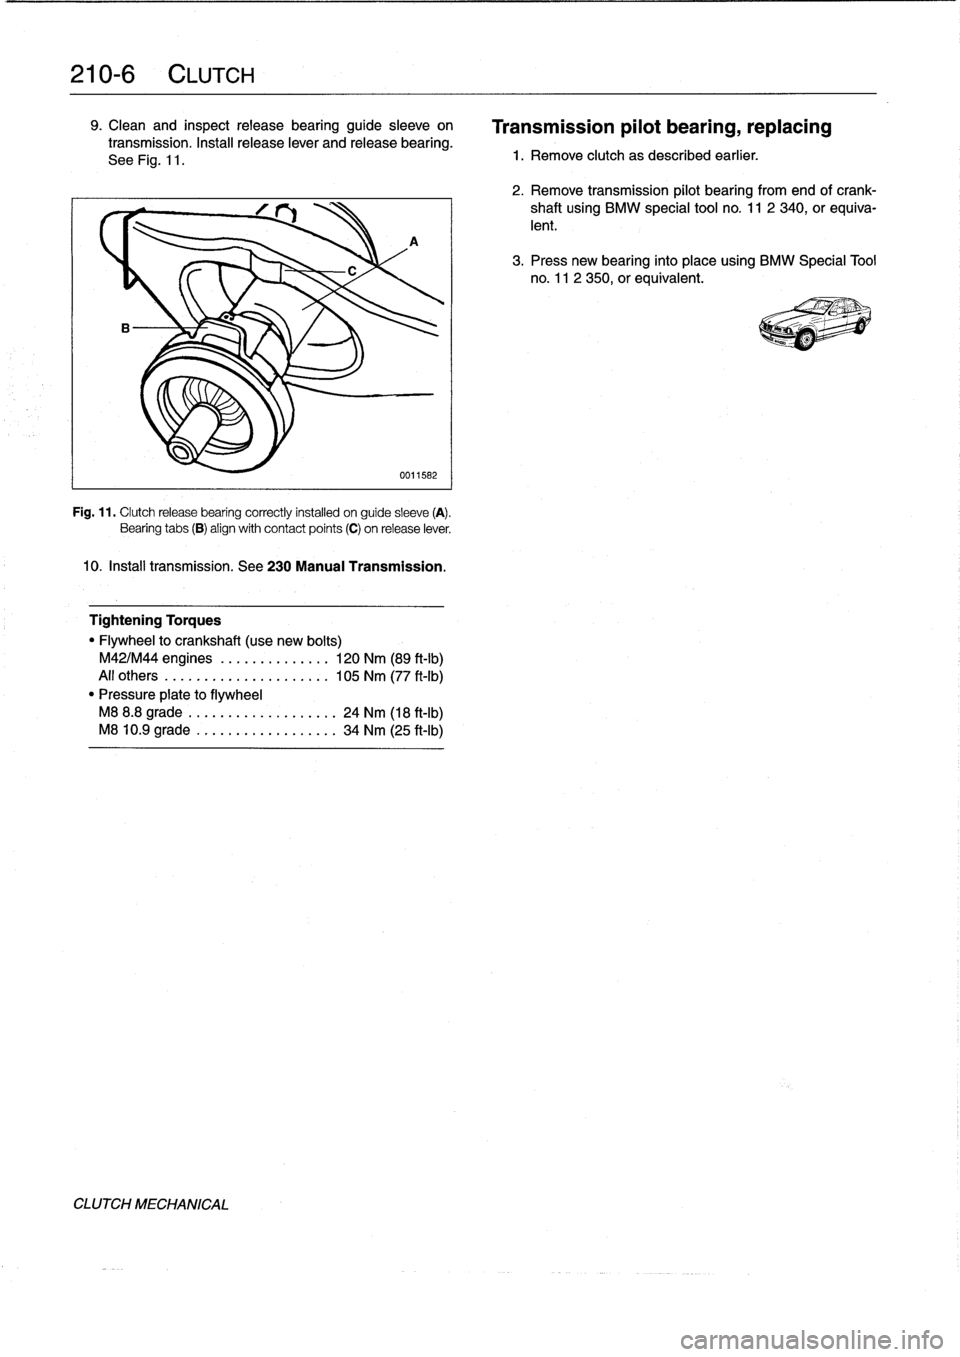 BMW 318i 1997 E36 Workshop Manual 
210-
6
CLUTCH

9
.
Clean
and
inspectrelease
bearing
guide
sleeve
on

transmission
.
Install
release
lever
and
release
bearing
.

See
Fig
.
11
.

A

0011582

Fig
.
11
.
Clutchrelease
bearing
correctly